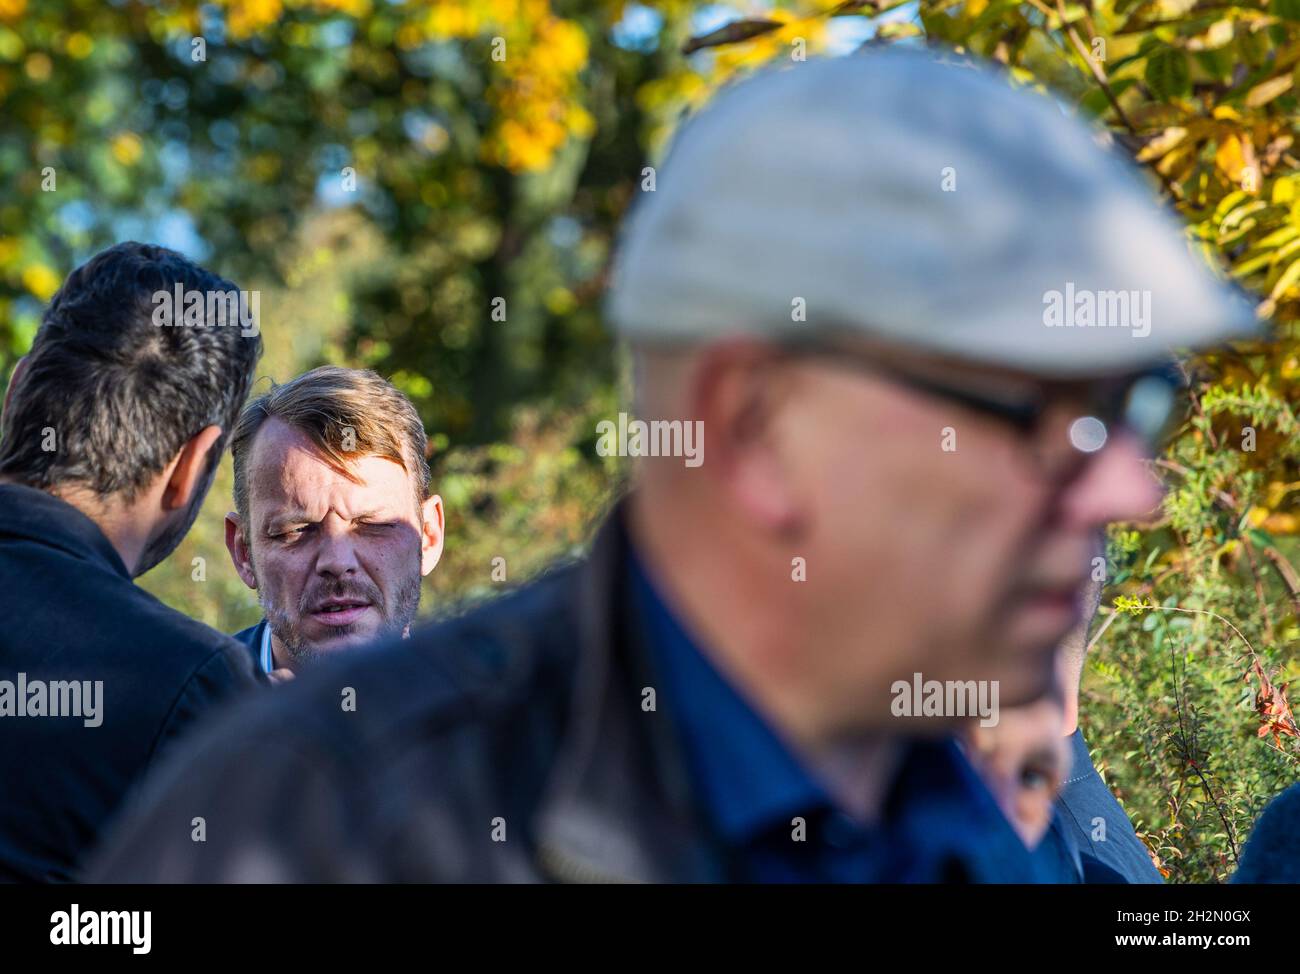 Western Pomerania, Germany. 23rd Oct, 2021. Western Pomerania, Germany. 23rd Oct, 2021. 23 October 2021, Mecklenburg-Western Pomerania, Grevesmühlen: Nikolaus Kramer (back), parliamentary group leader of the AfD in the state parliament of Mecklenburg-Western Pomerania, watches AfD member Thomas Kerl (front) in front of the conference building before the start of the AfD state party conference. Kerl had published a video on his Facebook page claiming that there were rumors of 'wildest parties' in rooms of the AfD faction in the state parliament and in the plenary hall. The AfD Mecklenburg-Weste Stock Photo